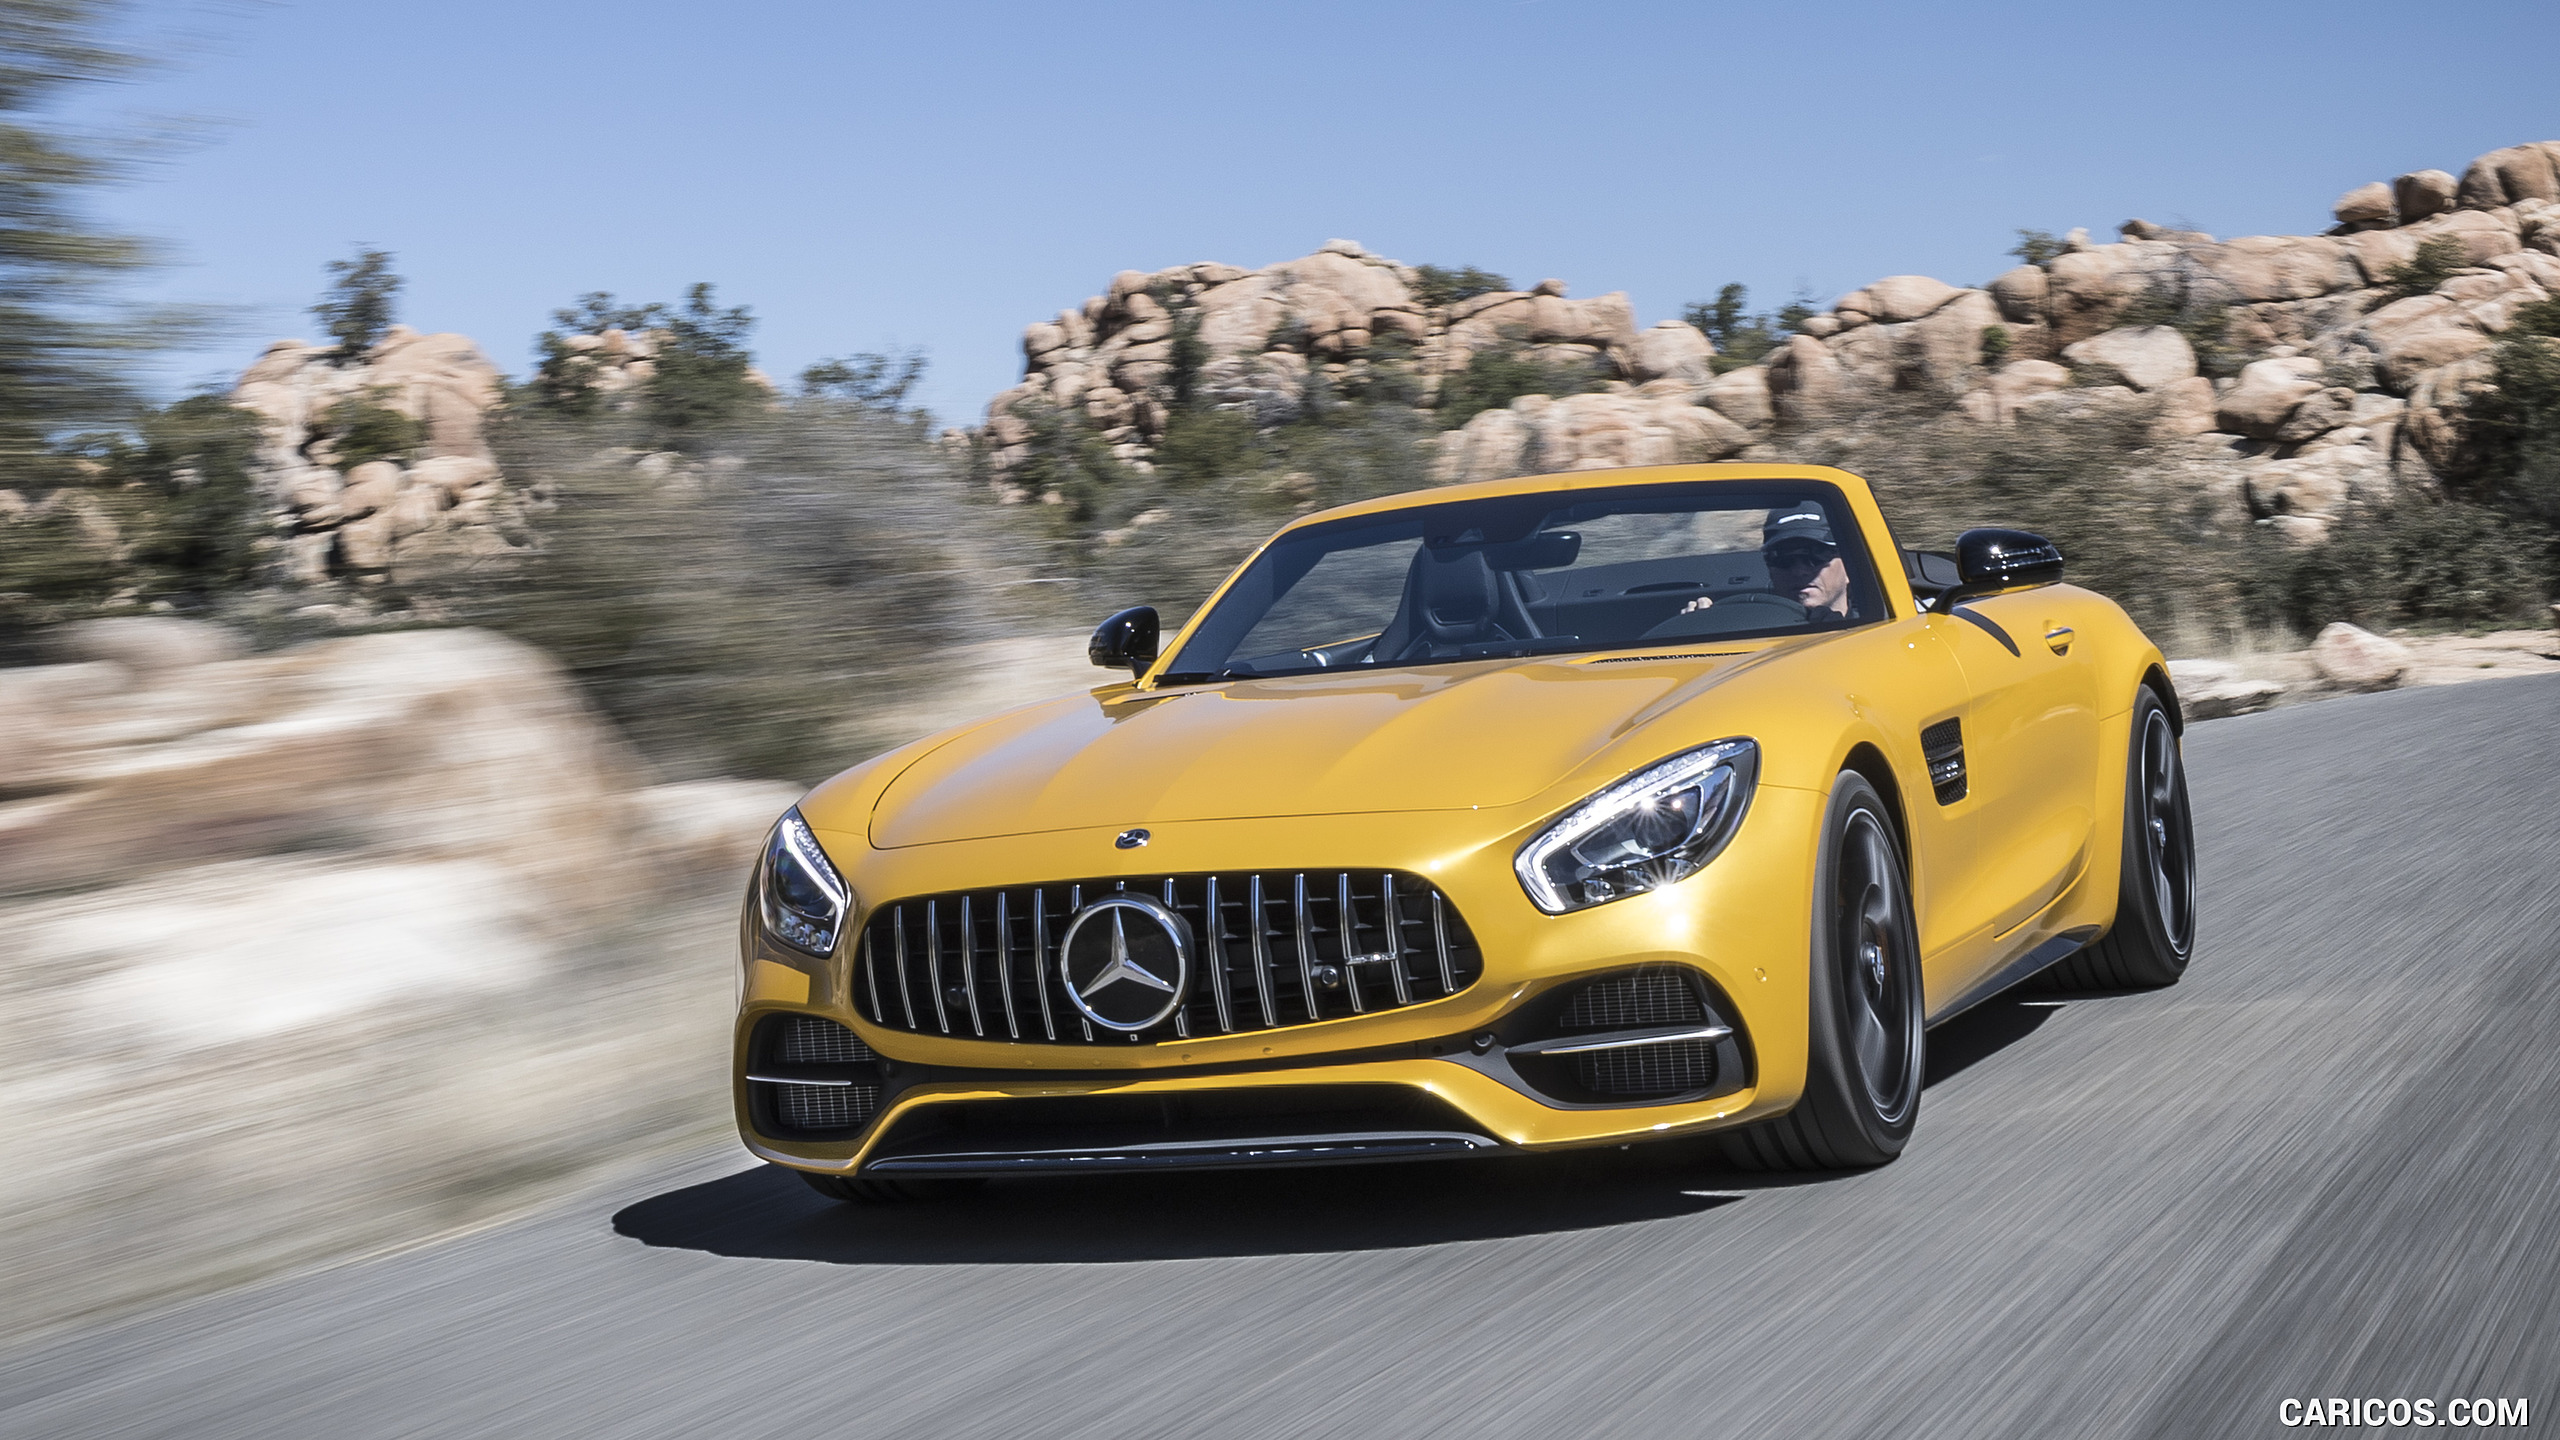 2018 Mercedes-AMG GT C Roadster - Front Three-Quarter, #186 of 350